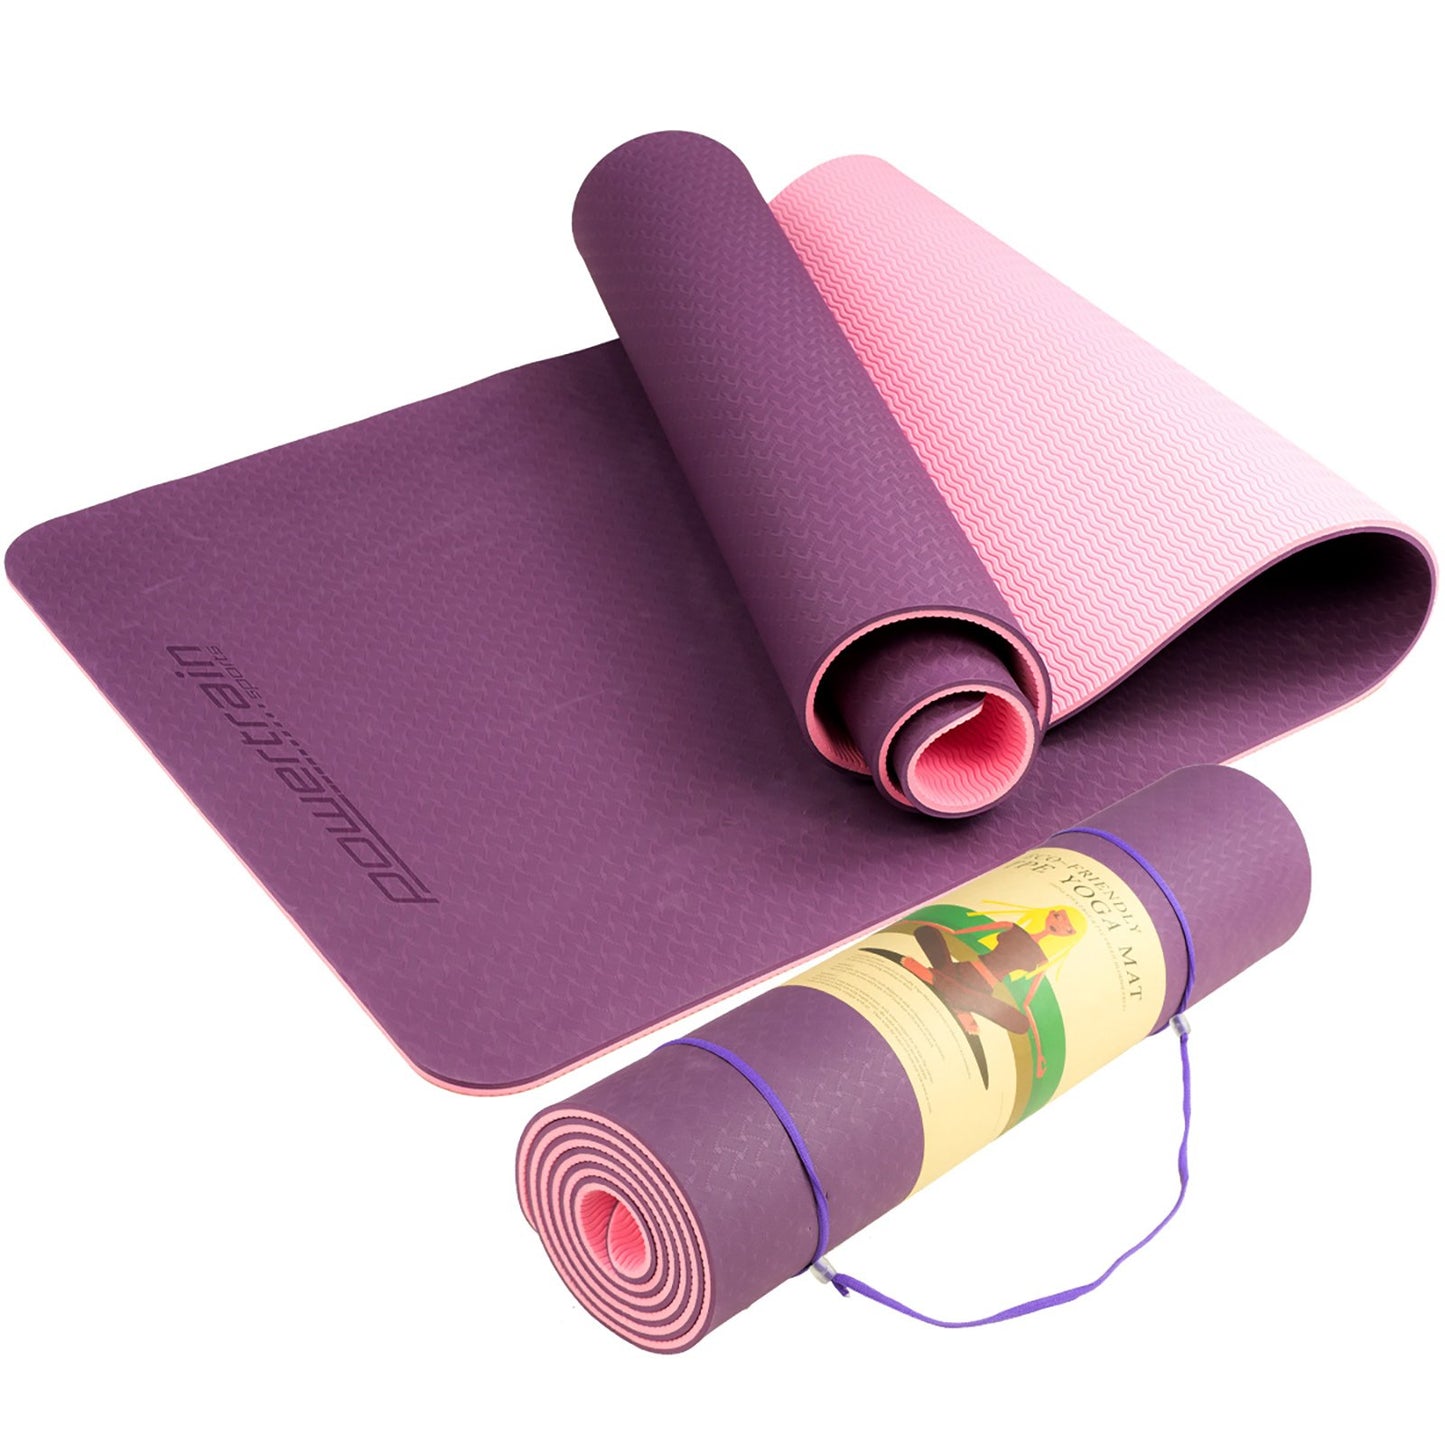 Powertrain Eco-Friendly Dual Layer 8mm Yoga Mat | Purple | Non-Slip Surface and Carry Strap for Ultimate Comfort and Portability